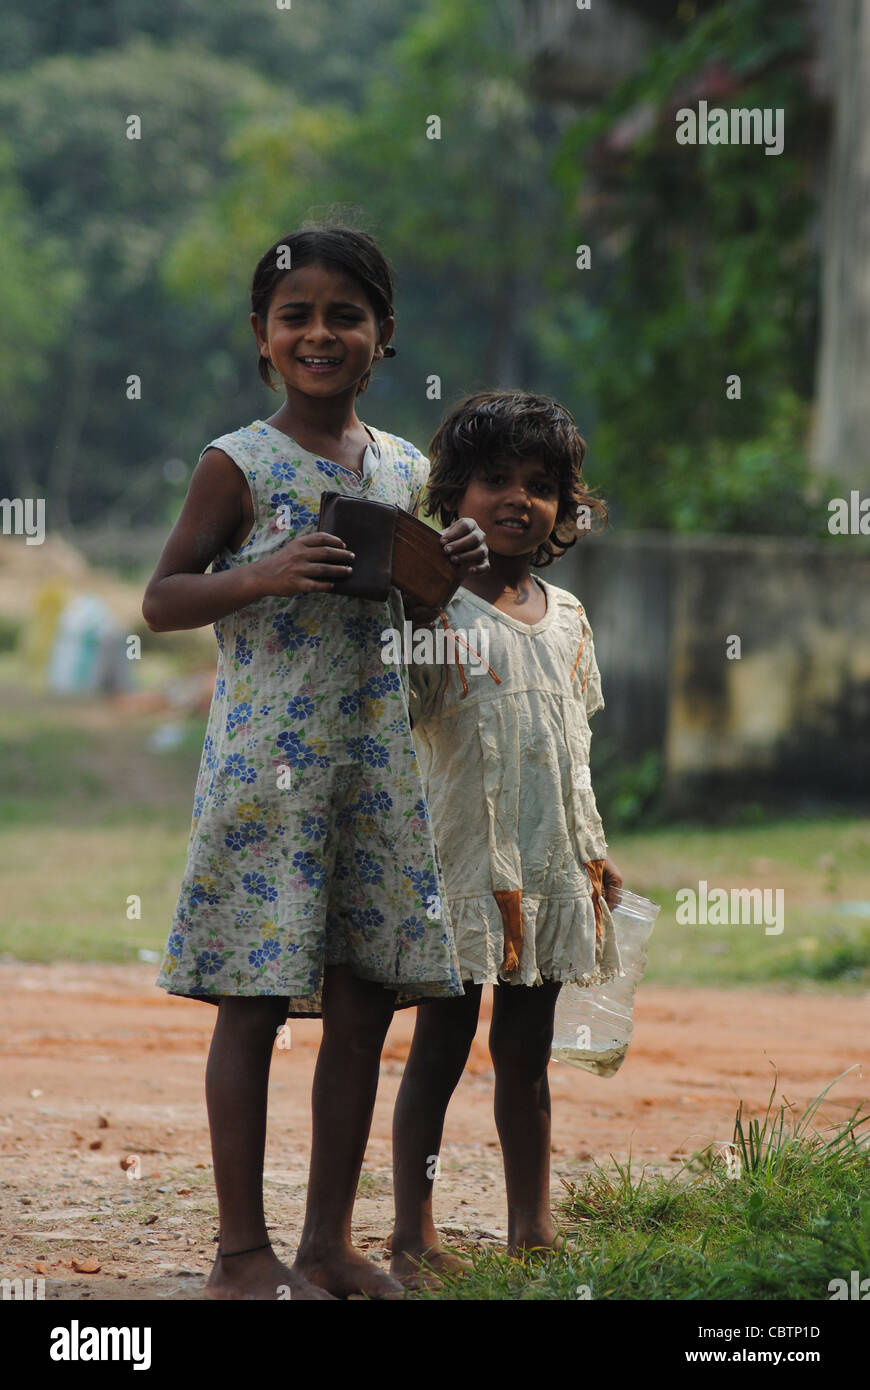 Two poor young girls faces the camera and smiles. Stock Photo